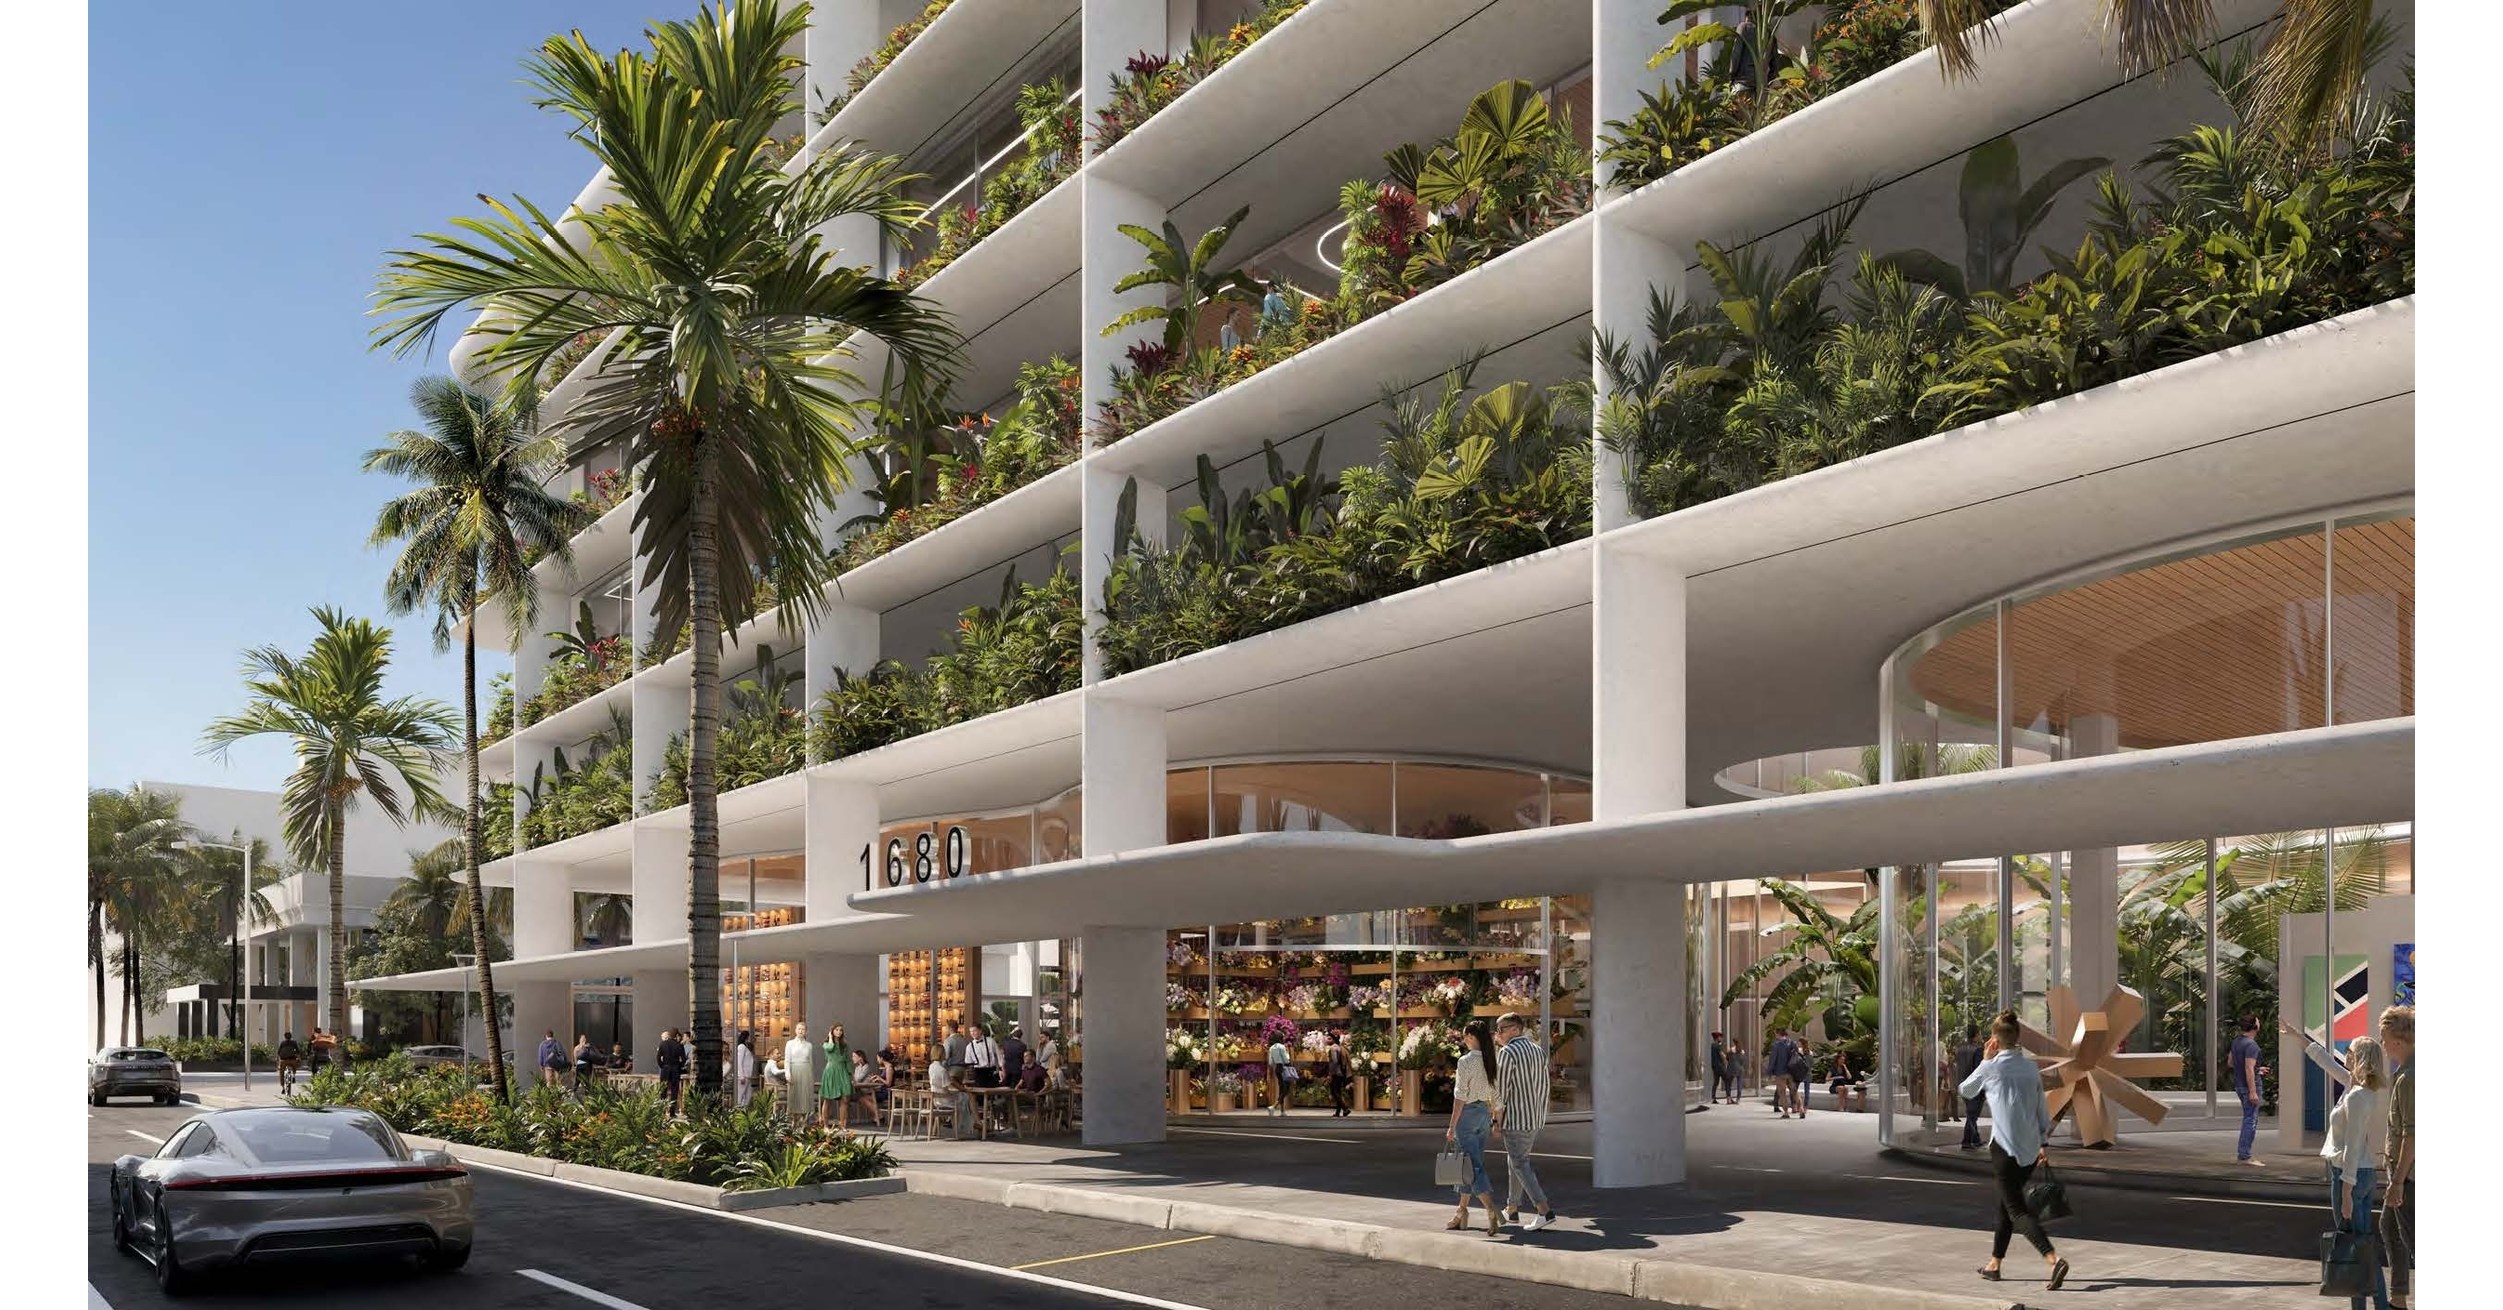 SHVO SECURES HISTORIC PRESERVATION BOARD APPROVAL FOR ONE SOUNDSCAPE PARK,  FIRST PETER MARINO DESIGNED OFFICE BUILDING IN MIAMI BEACH